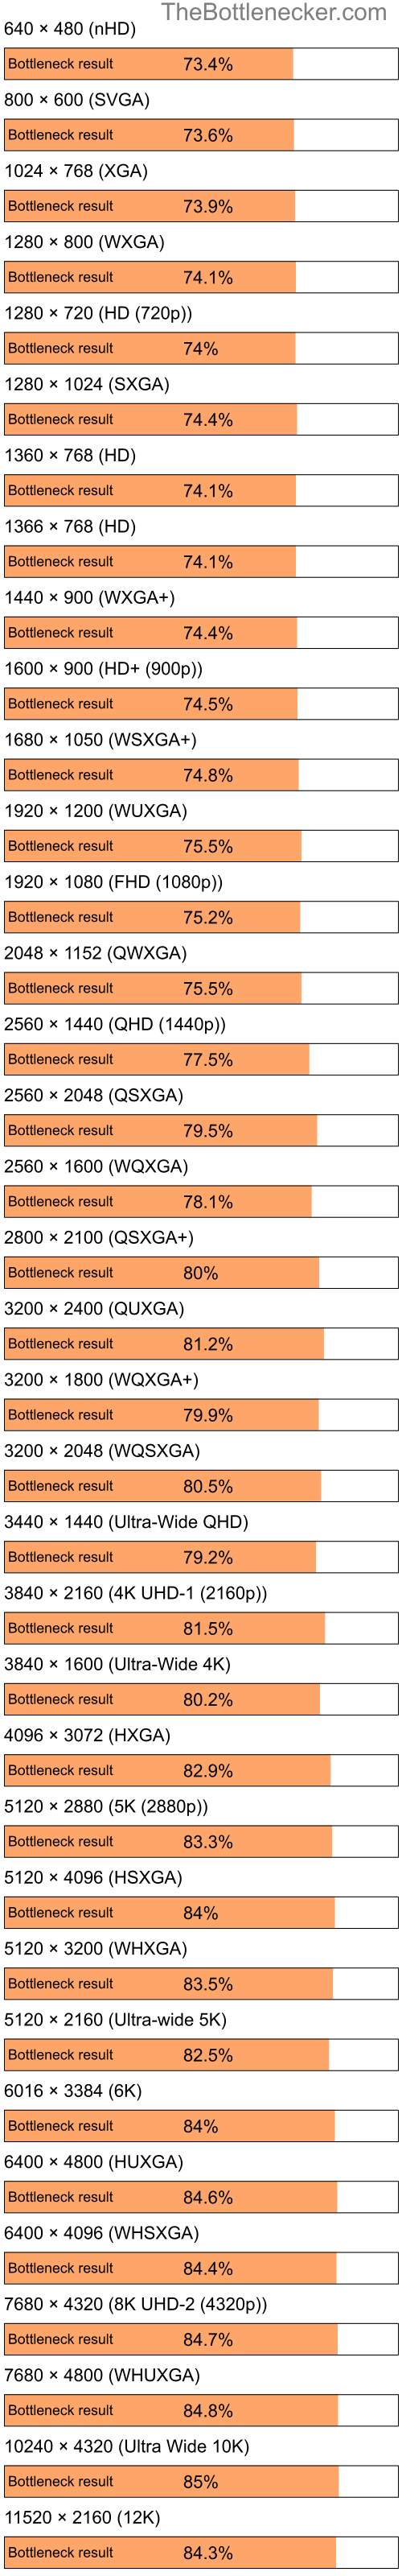 Bottleneck results by resolution for Intel Atom Z520 and AMD Radeon X700 in Graphic Card Intense Tasks